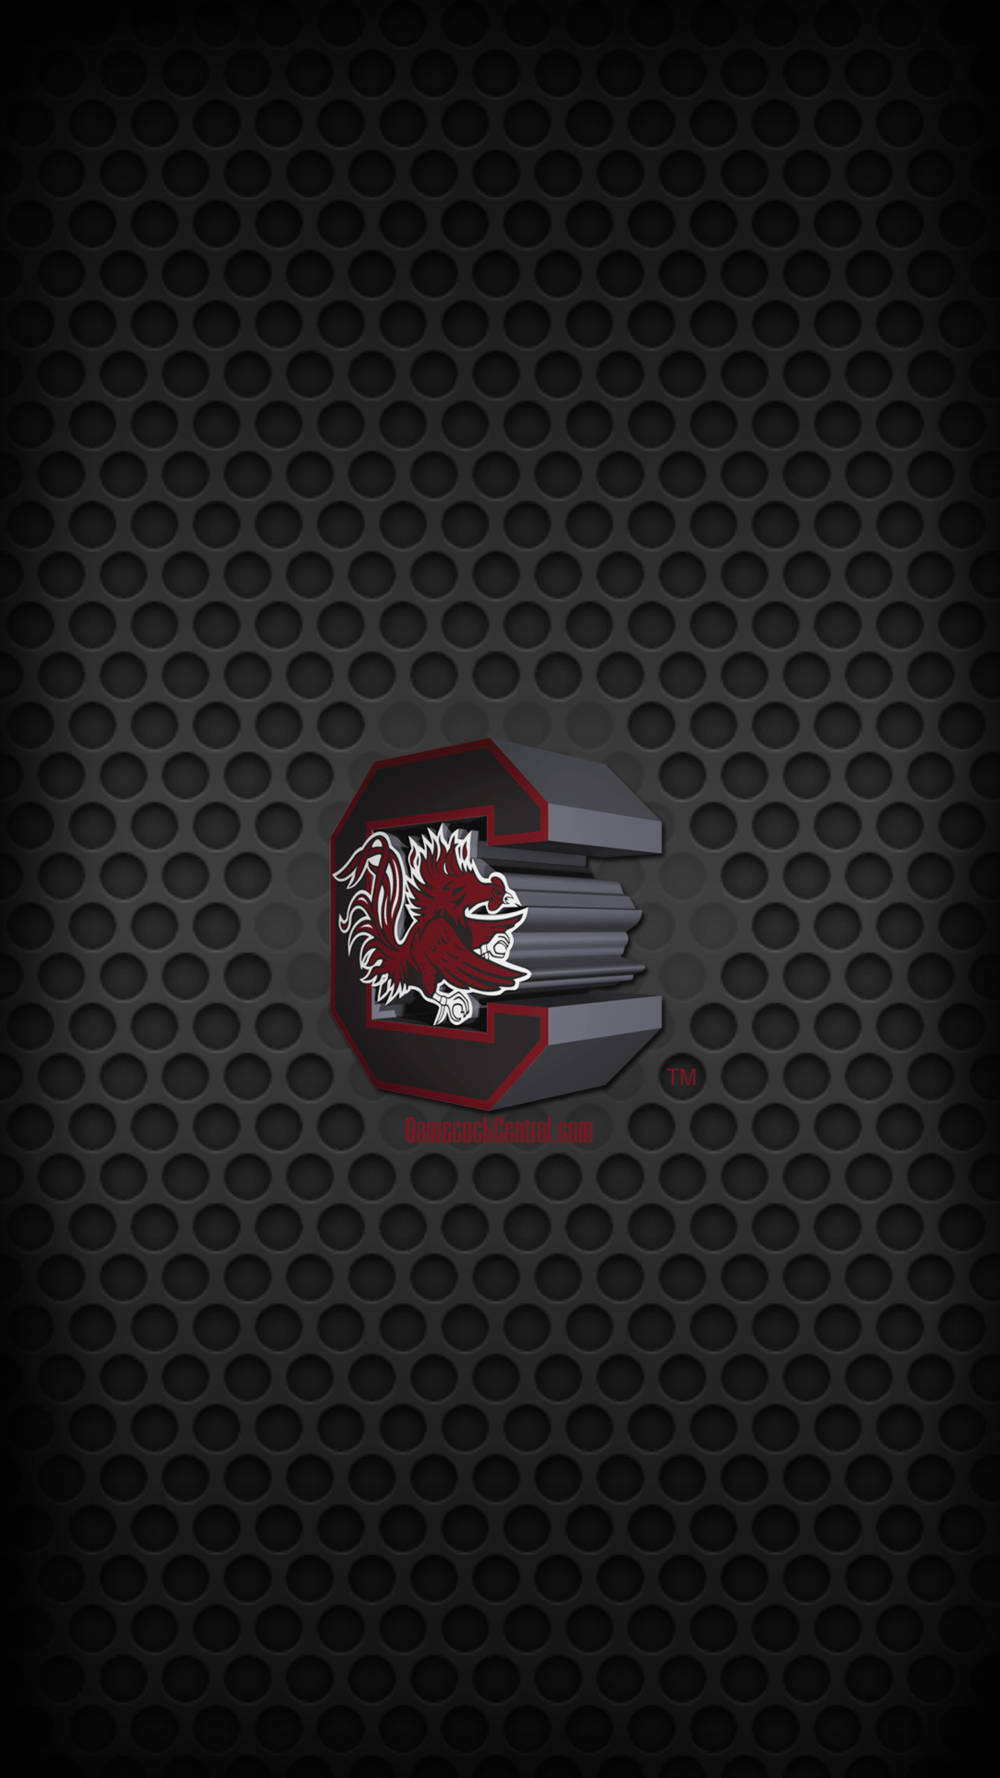 South Carolina Gamecocks ready to put their fans on top. Wallpaper